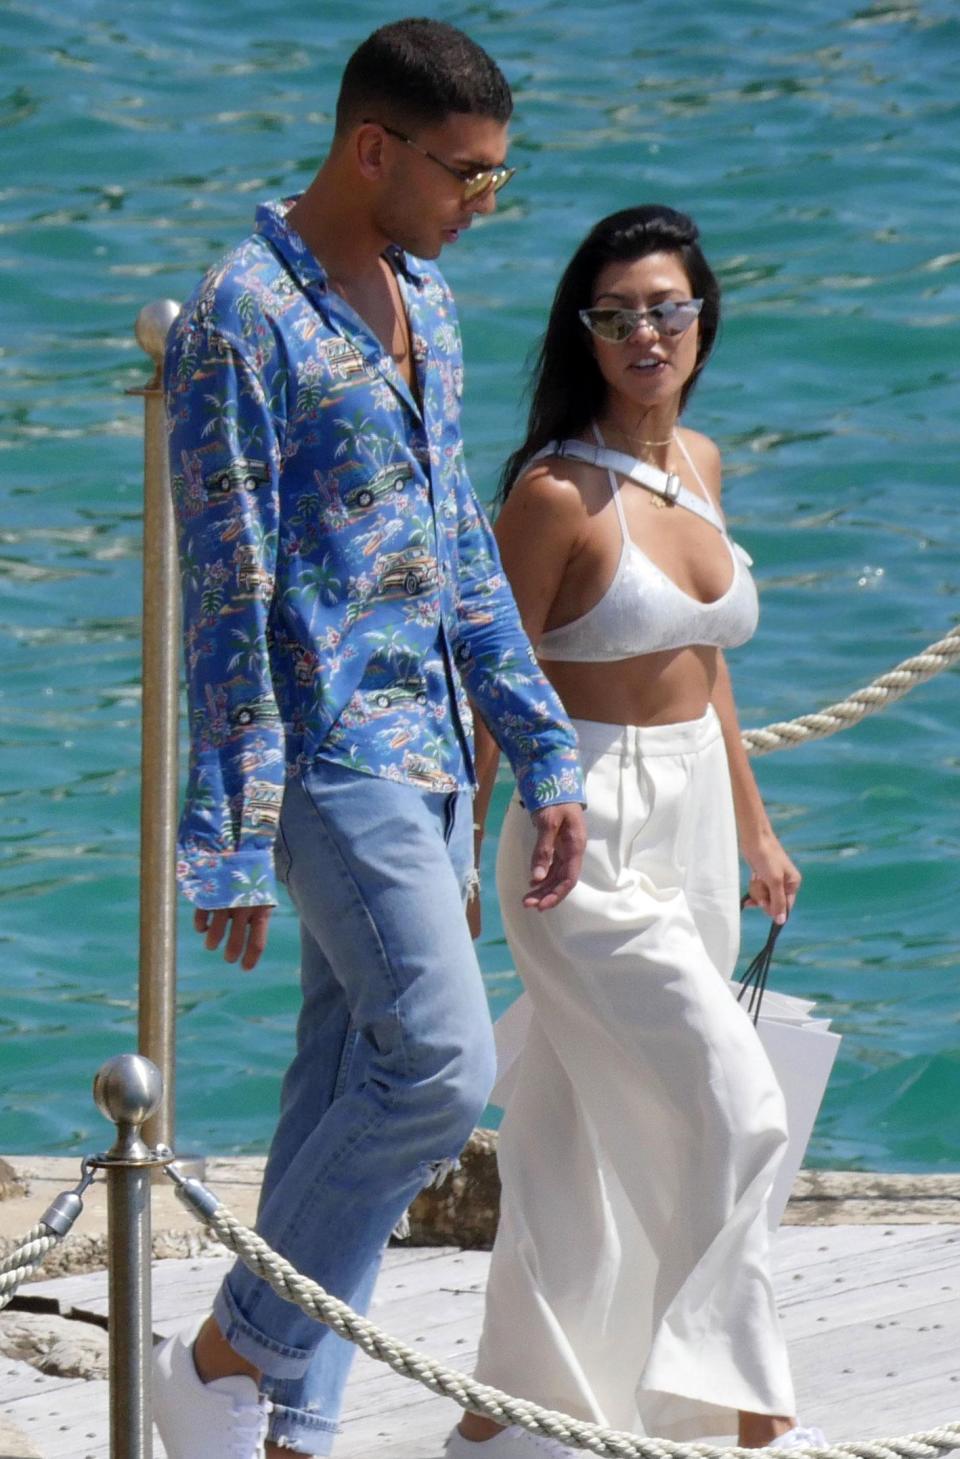 Kourtney and Kendall's bikini adventures continue in Cannes